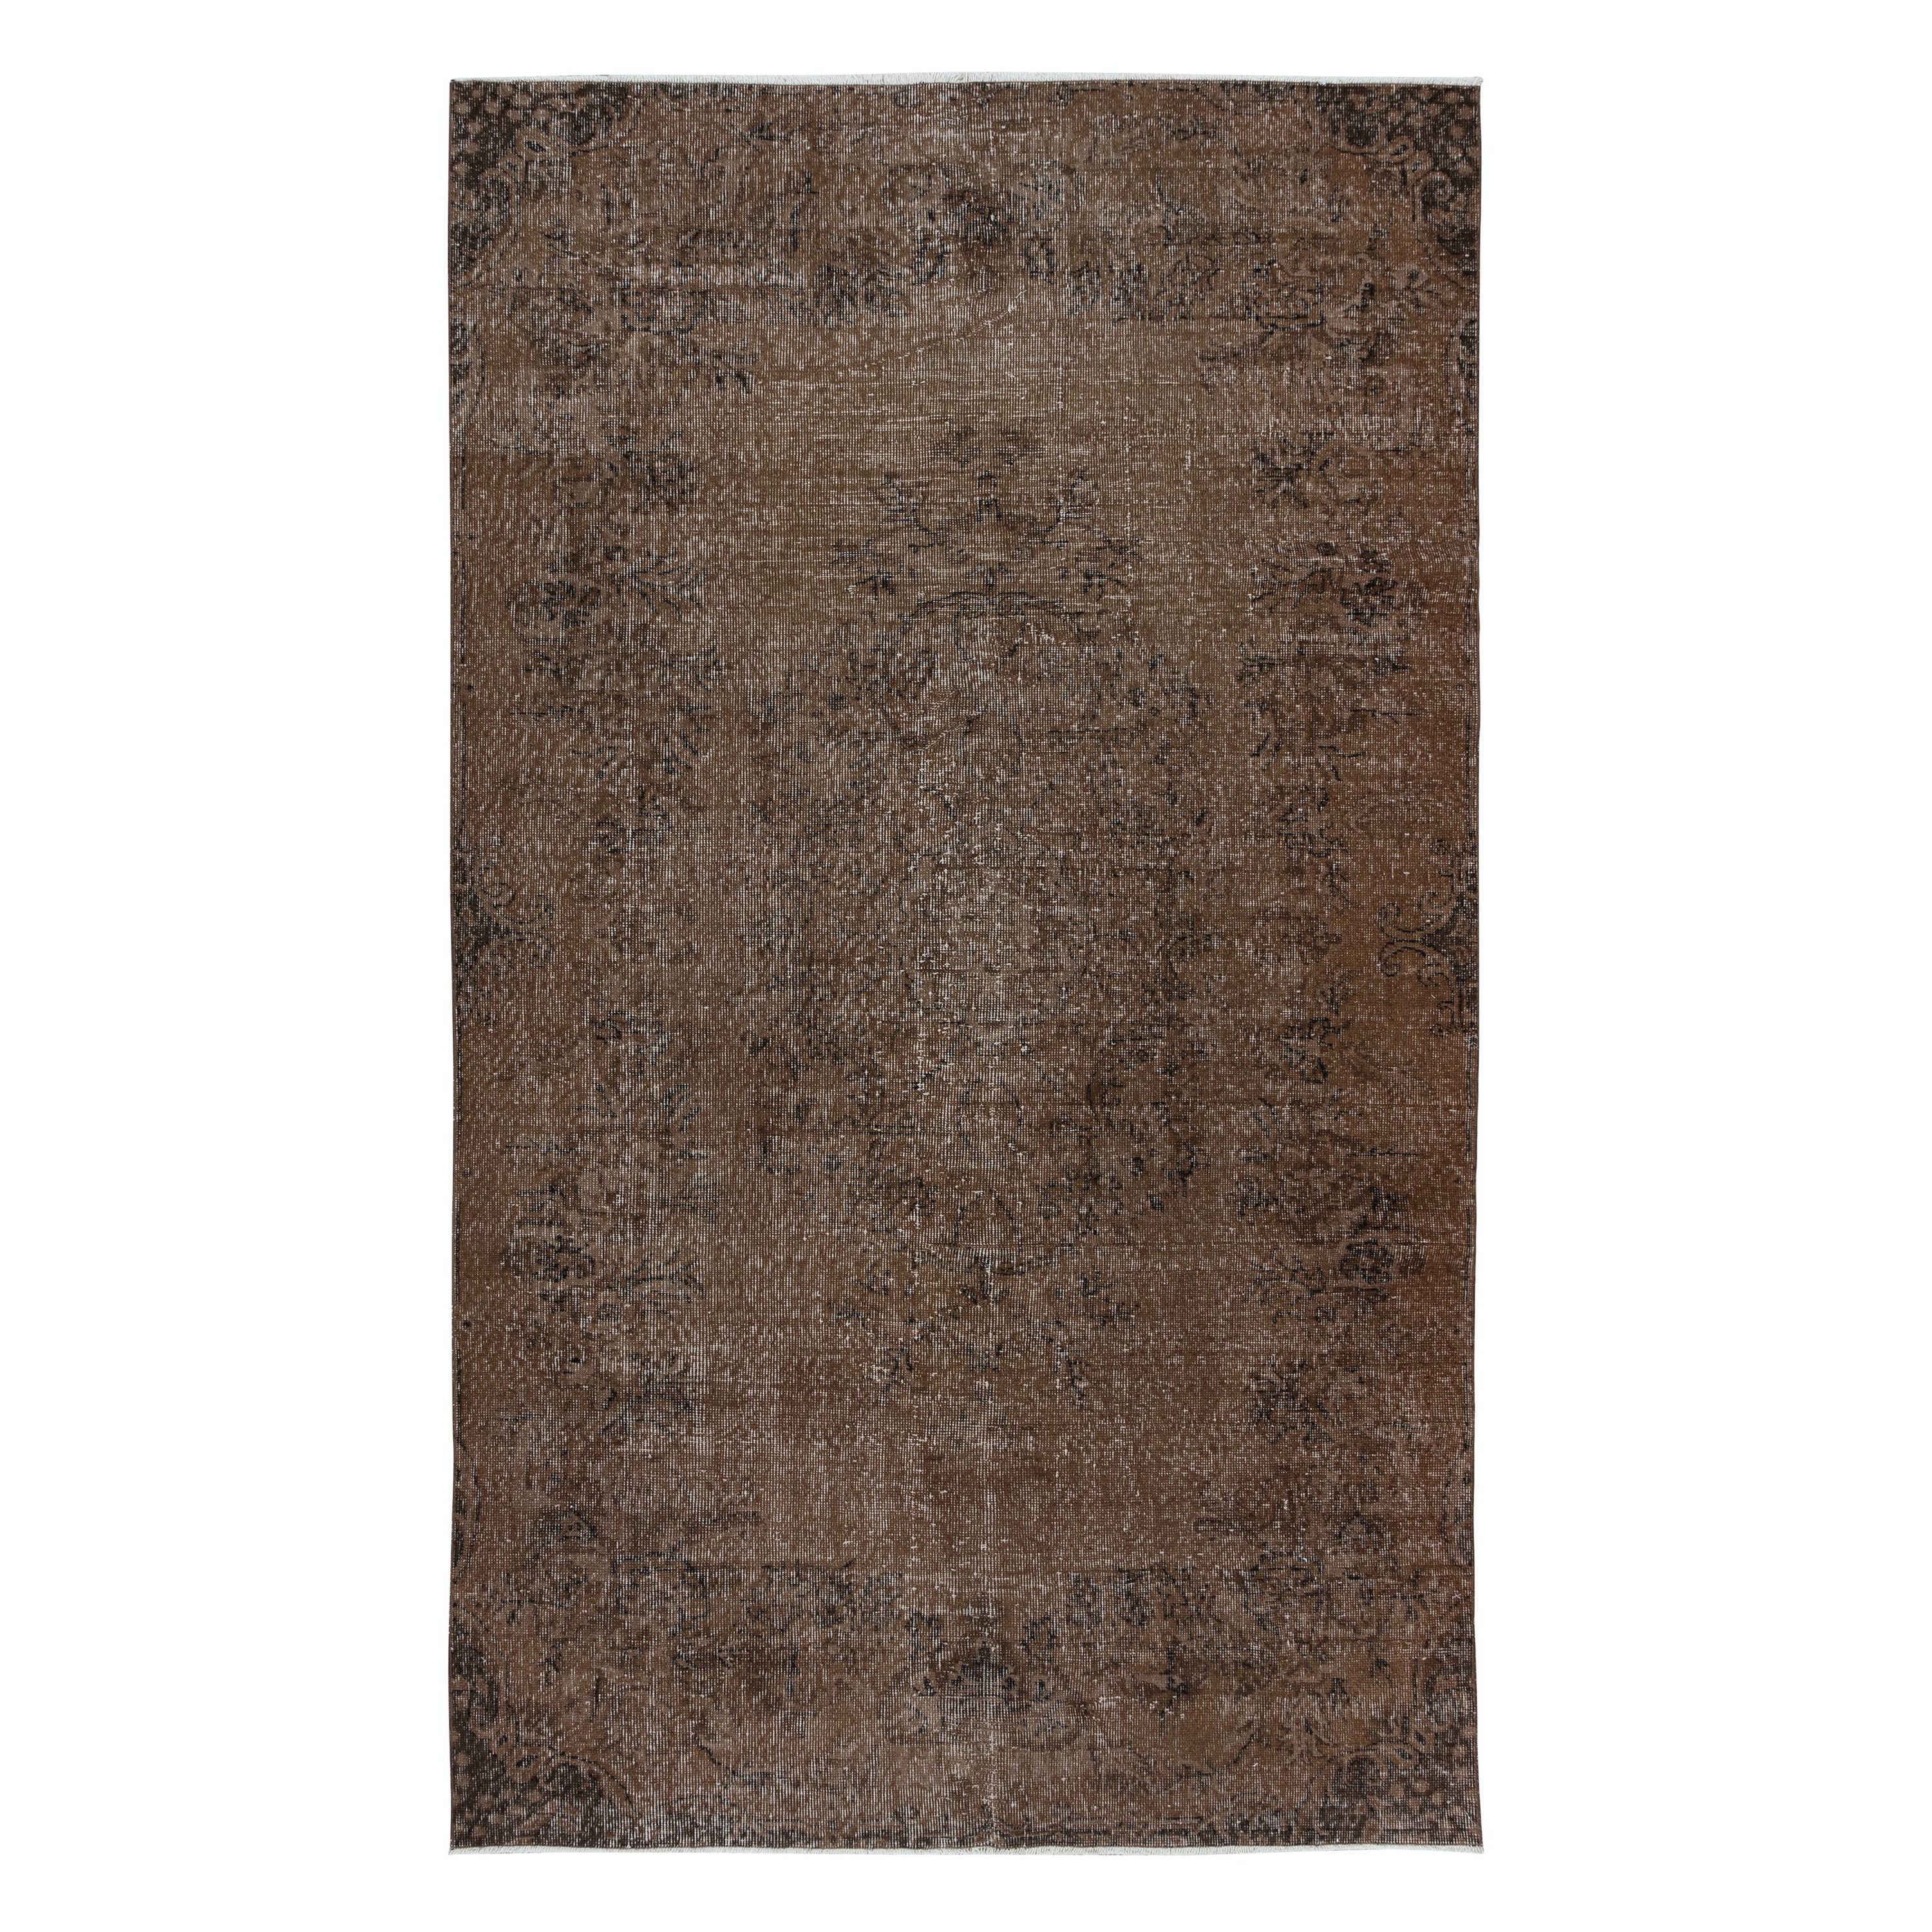 5.7x9.6 Ft Vintage Area Rug in Brown for Modern Interiors, HandKnotted in Turkey For Sale